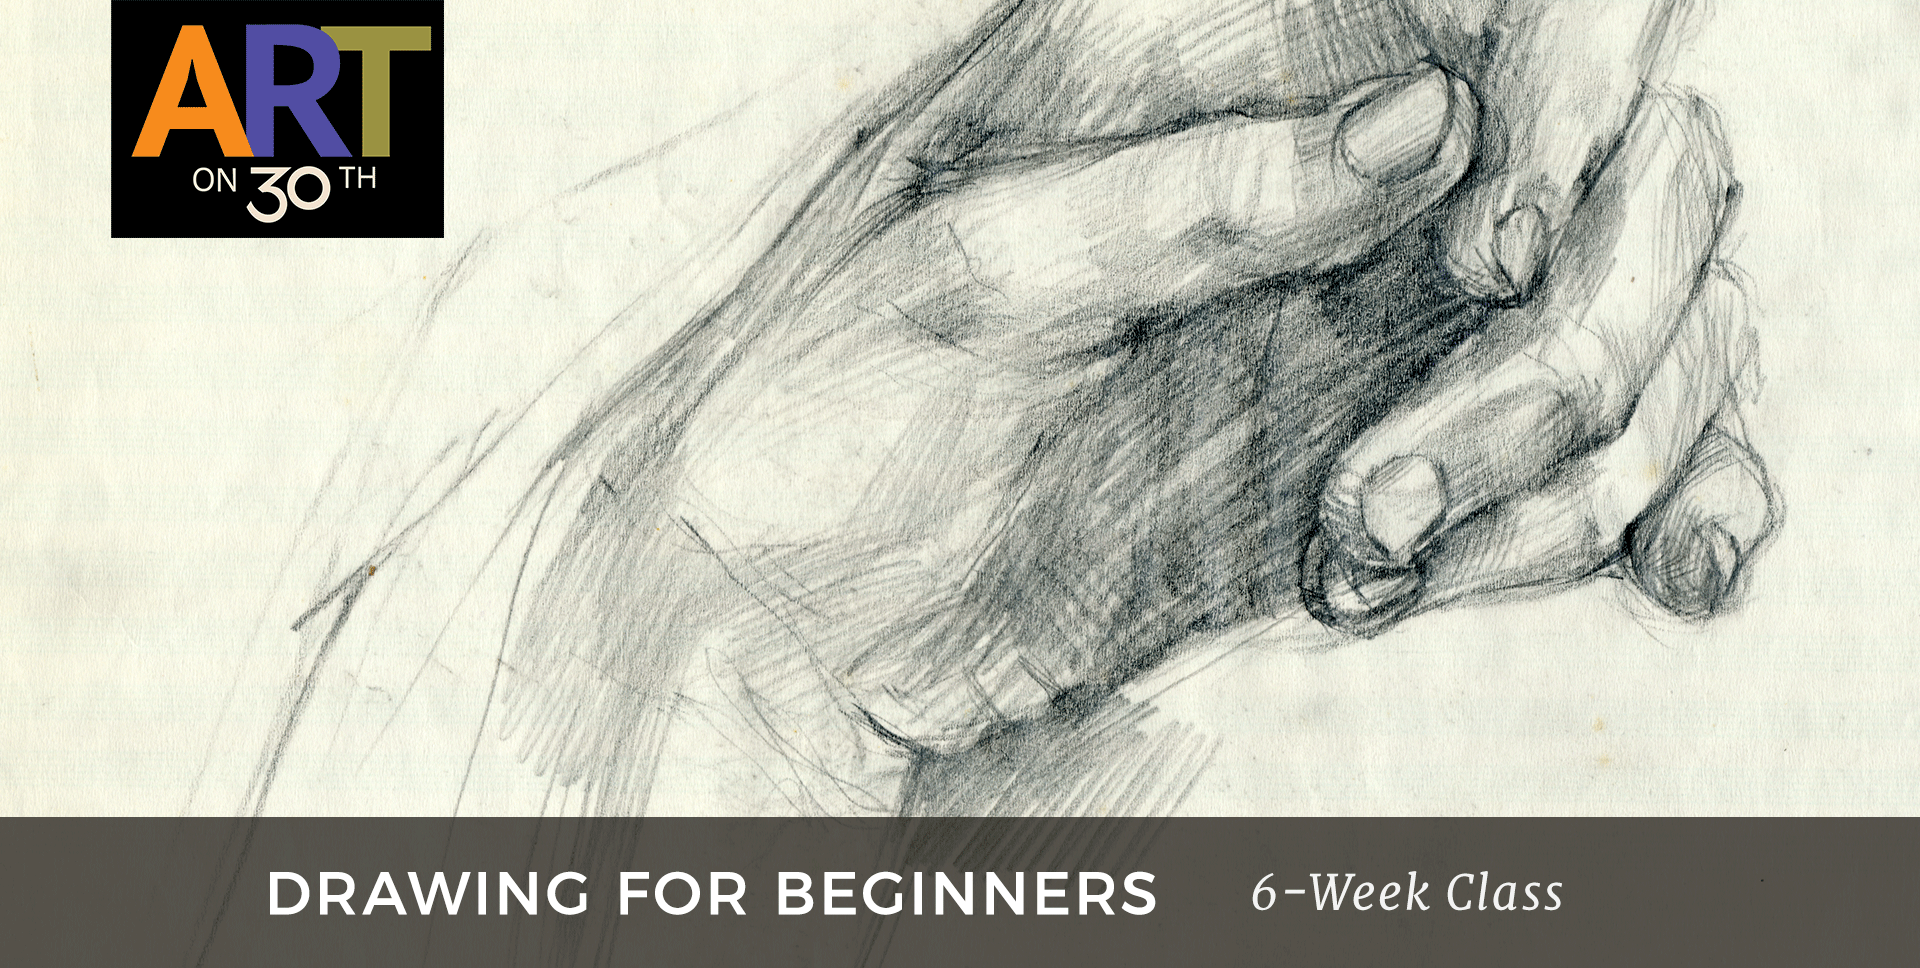 THU - Drawing for Beginners with instructor Duke Windsor